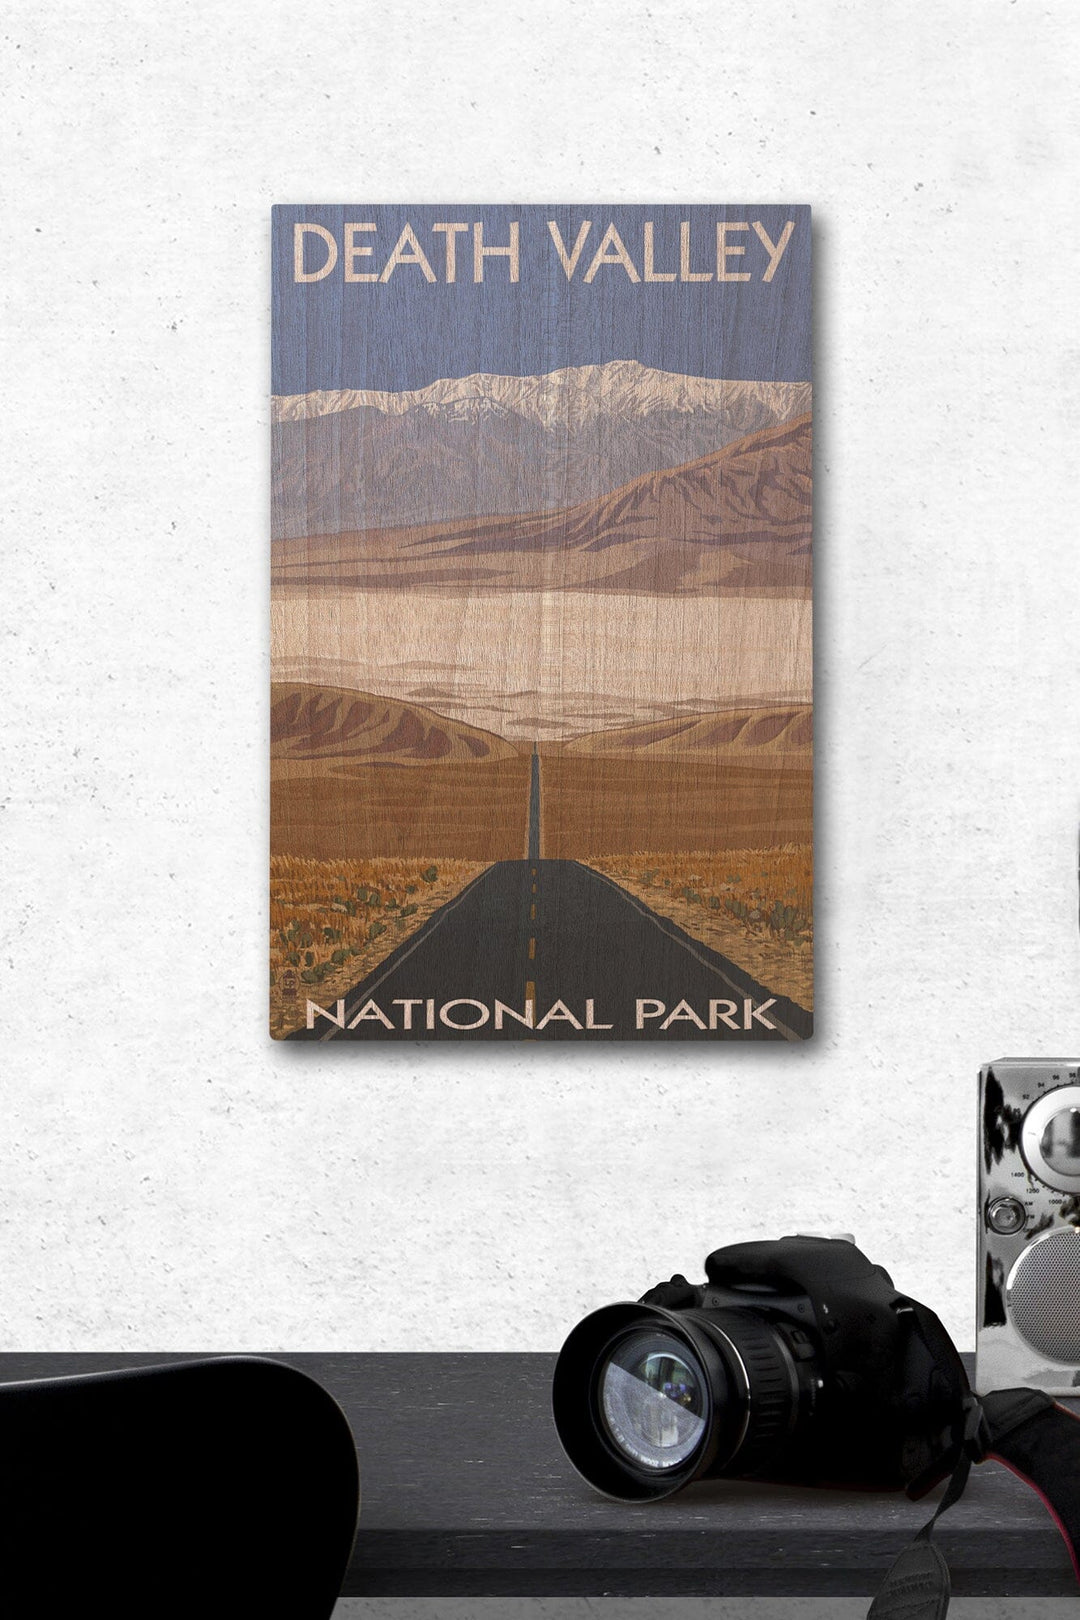 Death Valley National Park, California, Highway View, Lantern Press Artwork, Wood Signs and Postcards Wood Lantern Press 12 x 18 Wood Gallery Print 